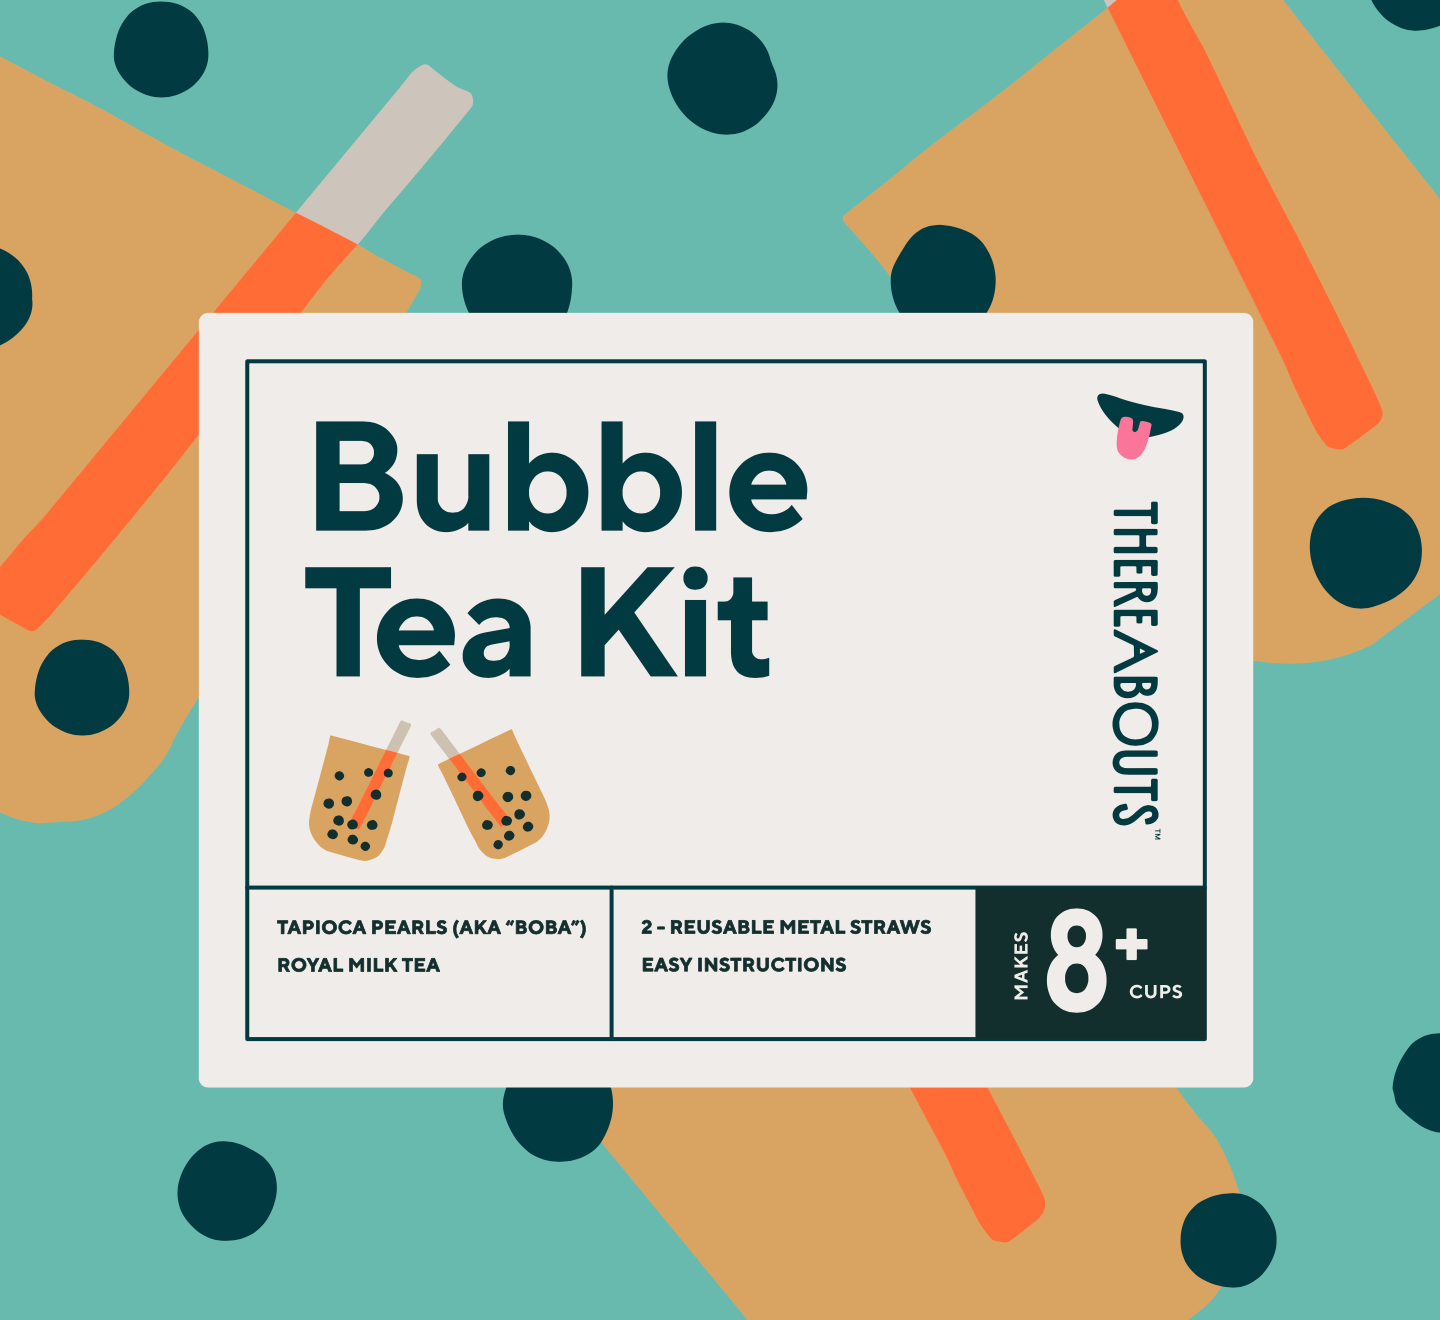 Premium Boba Tea Kit by Locca | Makes up to 24 Drinks | Bubble Tea Gift Kit  | Thai Tea Edition with Jasmine and Black Tea | Includes Tapioca Balls and